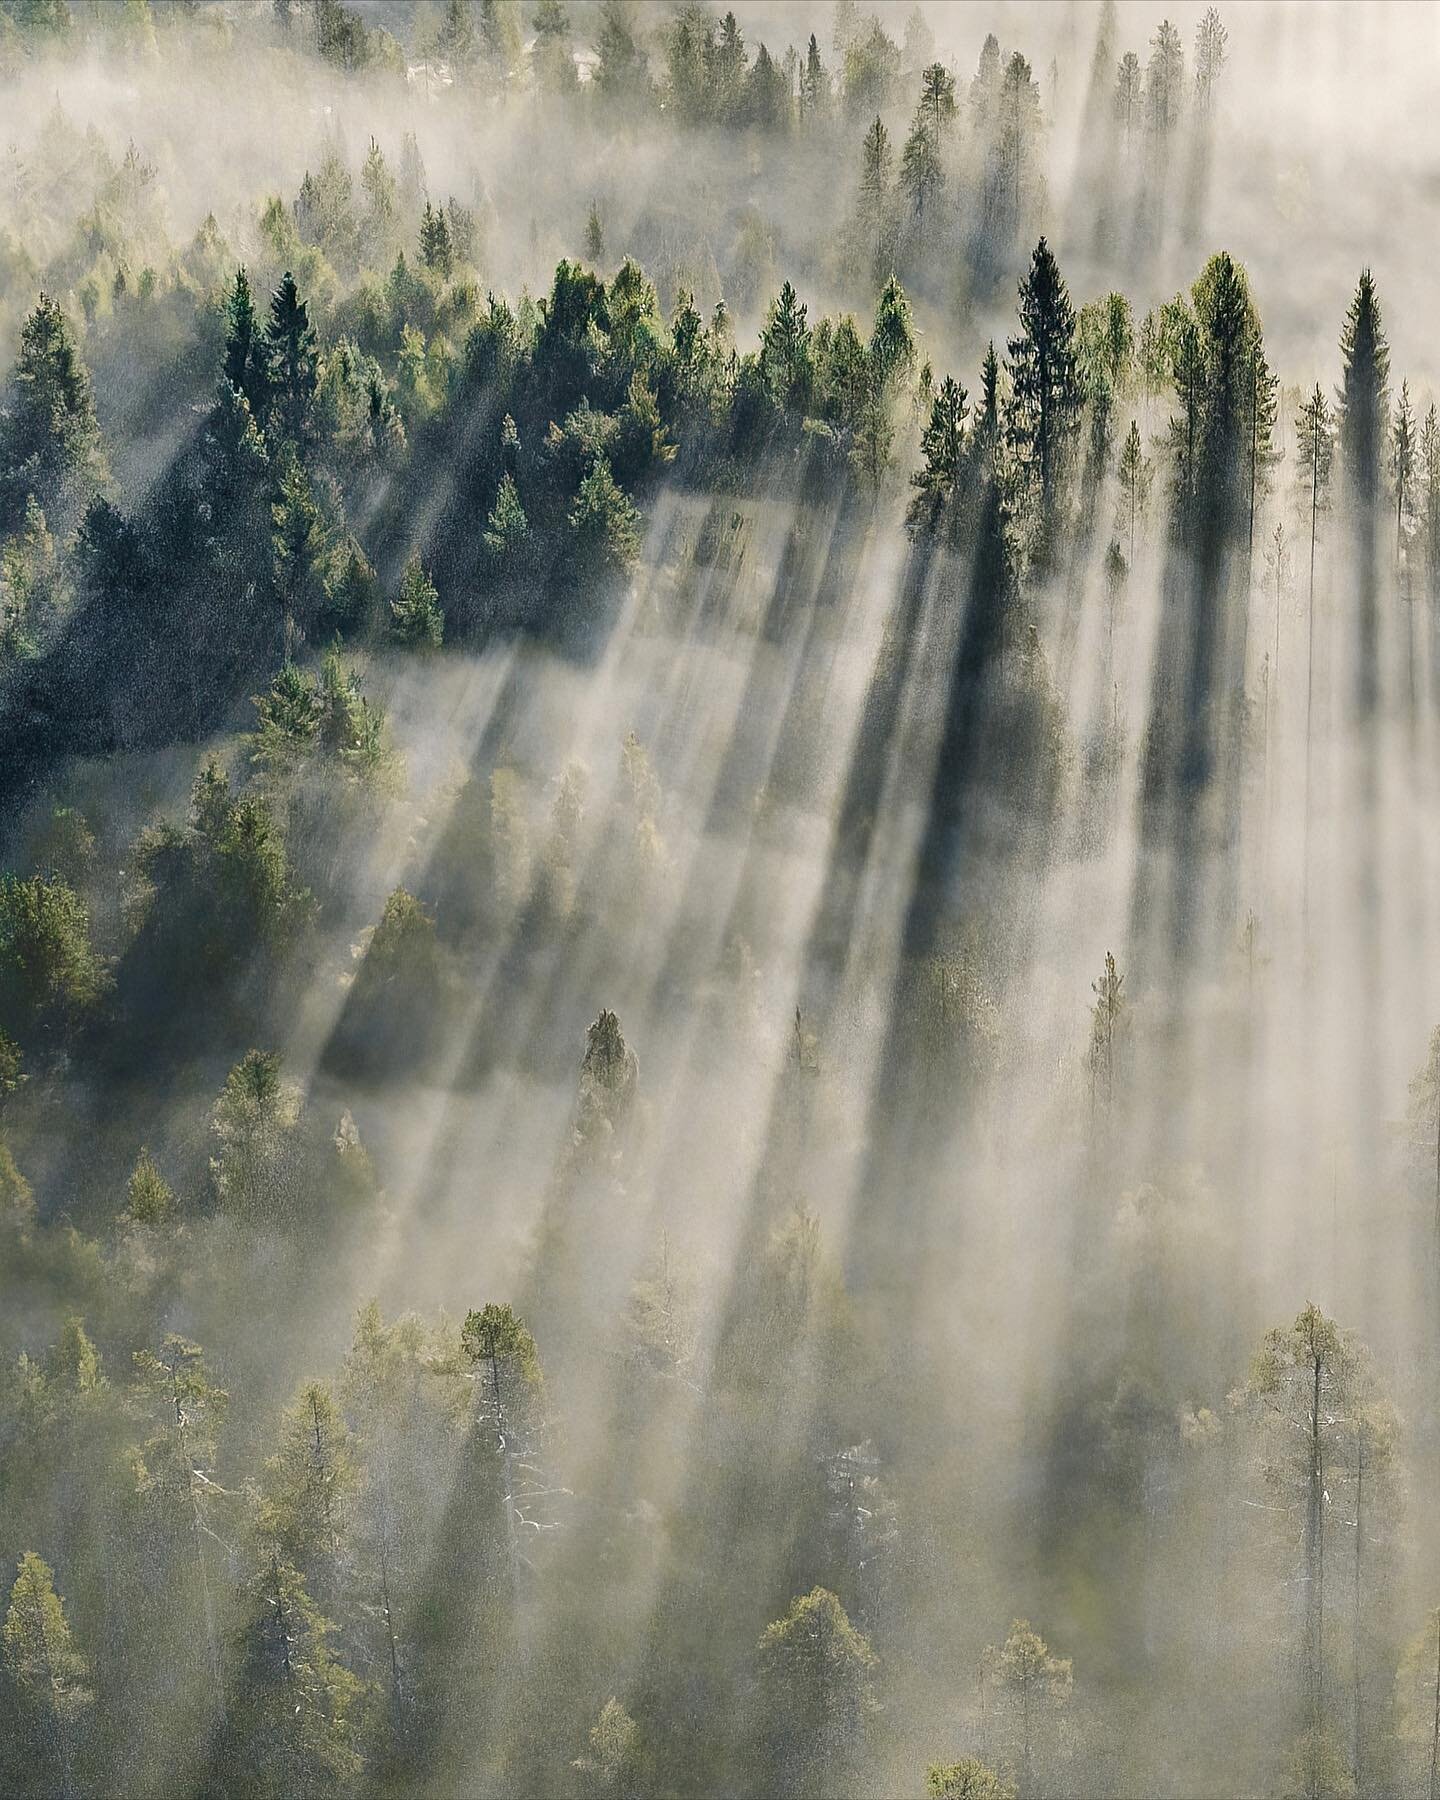 ~ Early morning in the central Finland&rsquo;s wilderness. A thin fog in the air with sun rays is when the magic happens.